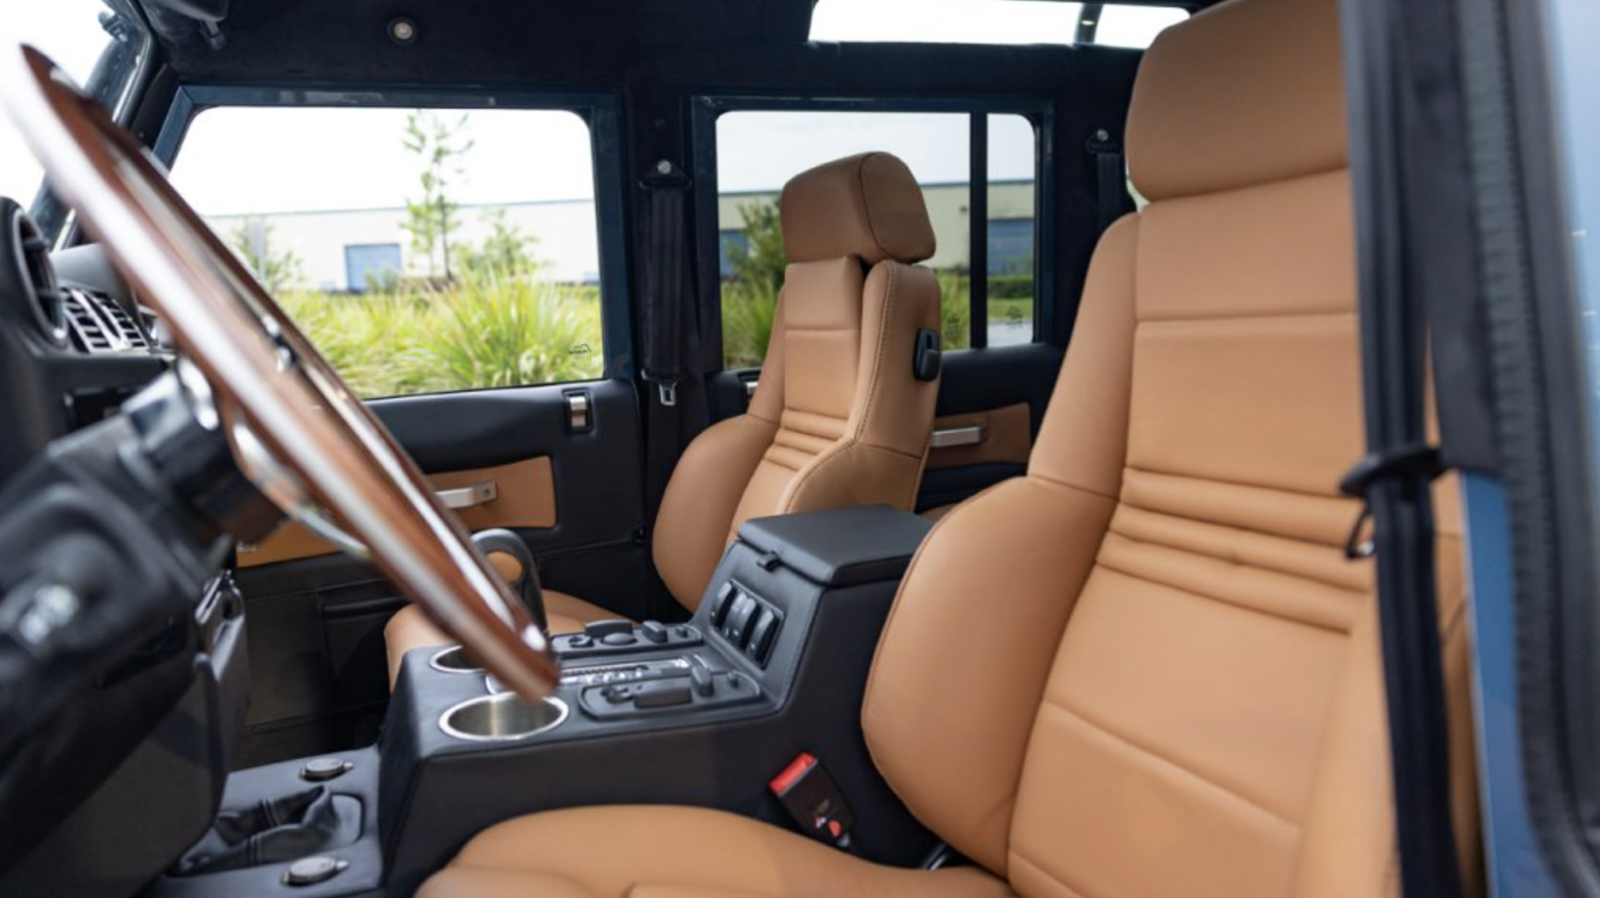 1993 land rover defender 110 (nas): upgraded with lamborghini olympus leather seats